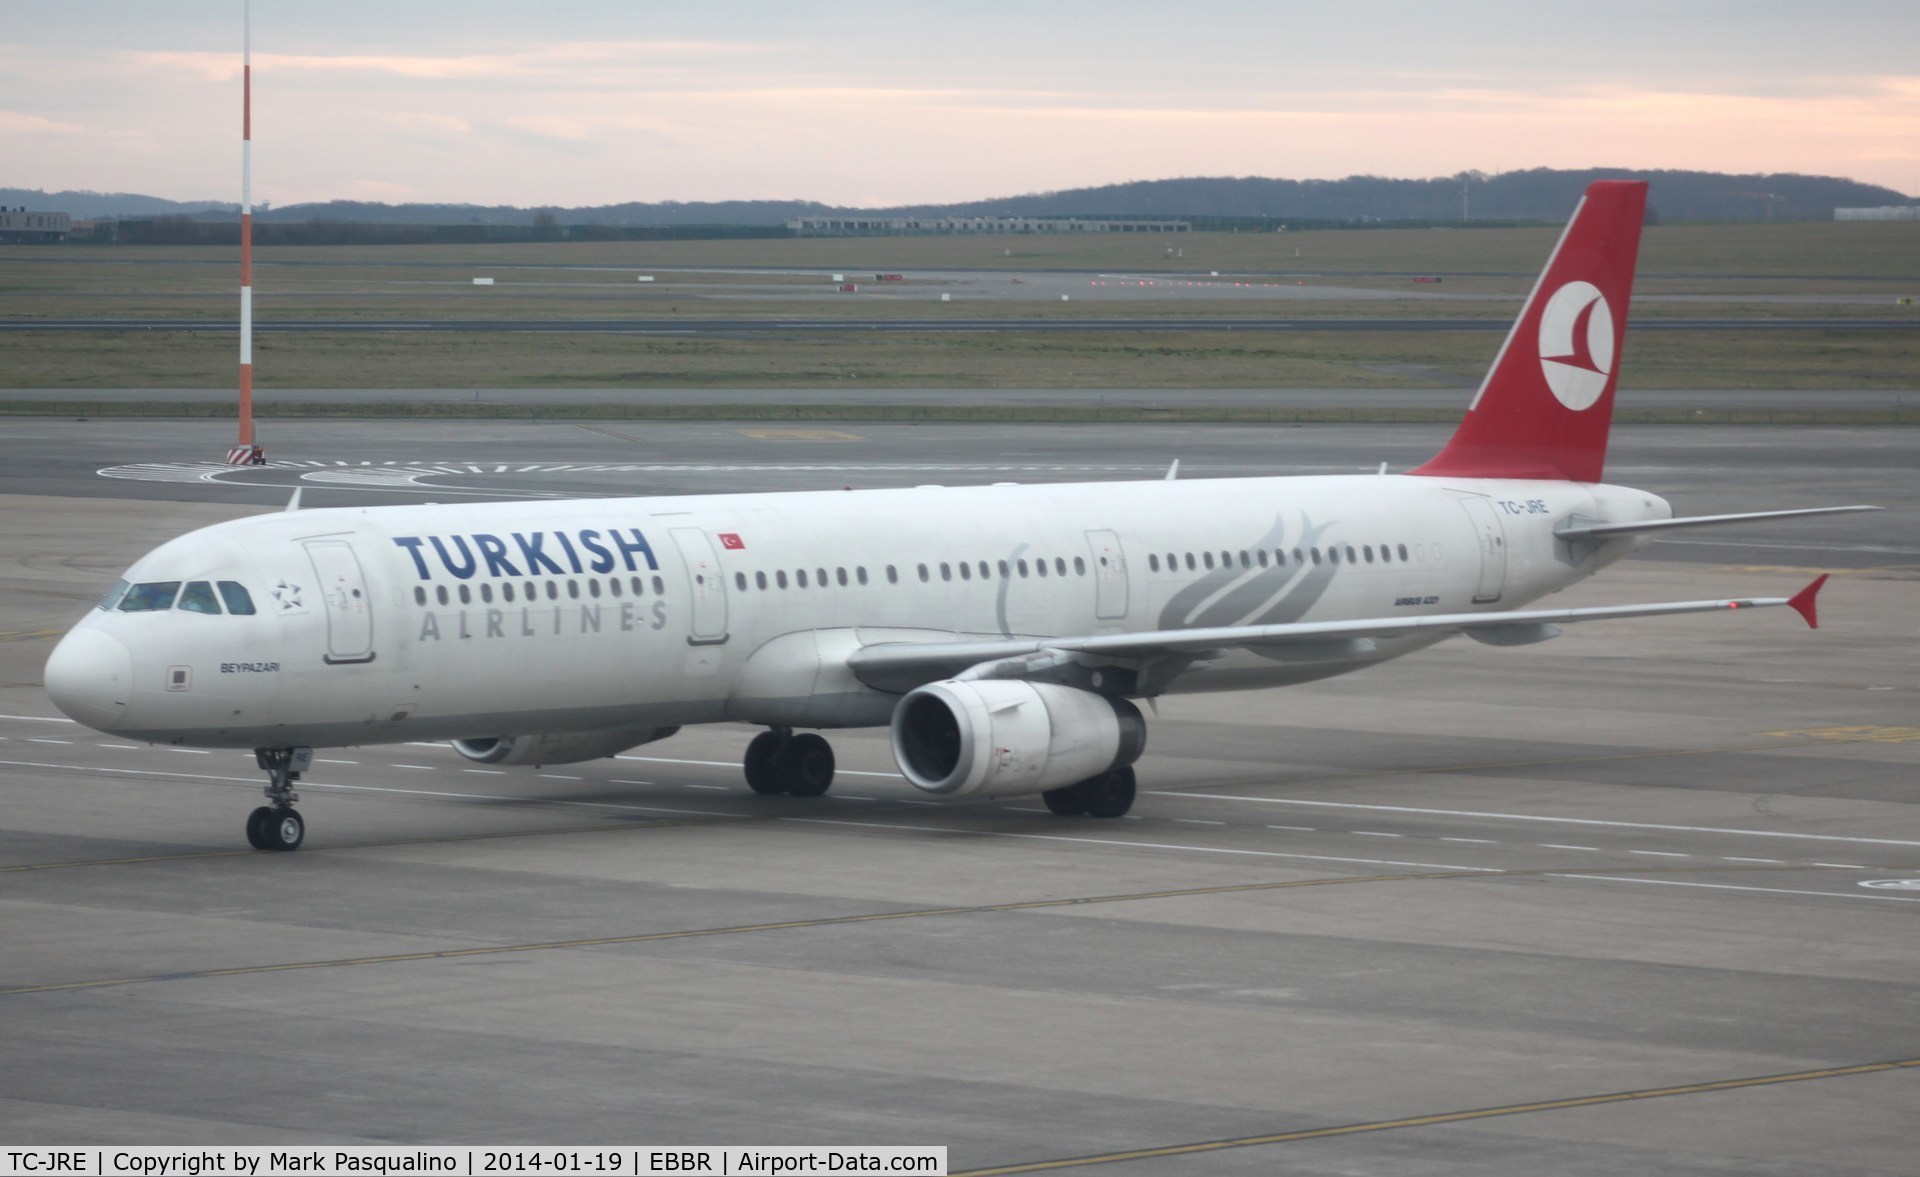 TC-JRE, 2007 Airbus A321-231 C/N 3126, Airbus A321